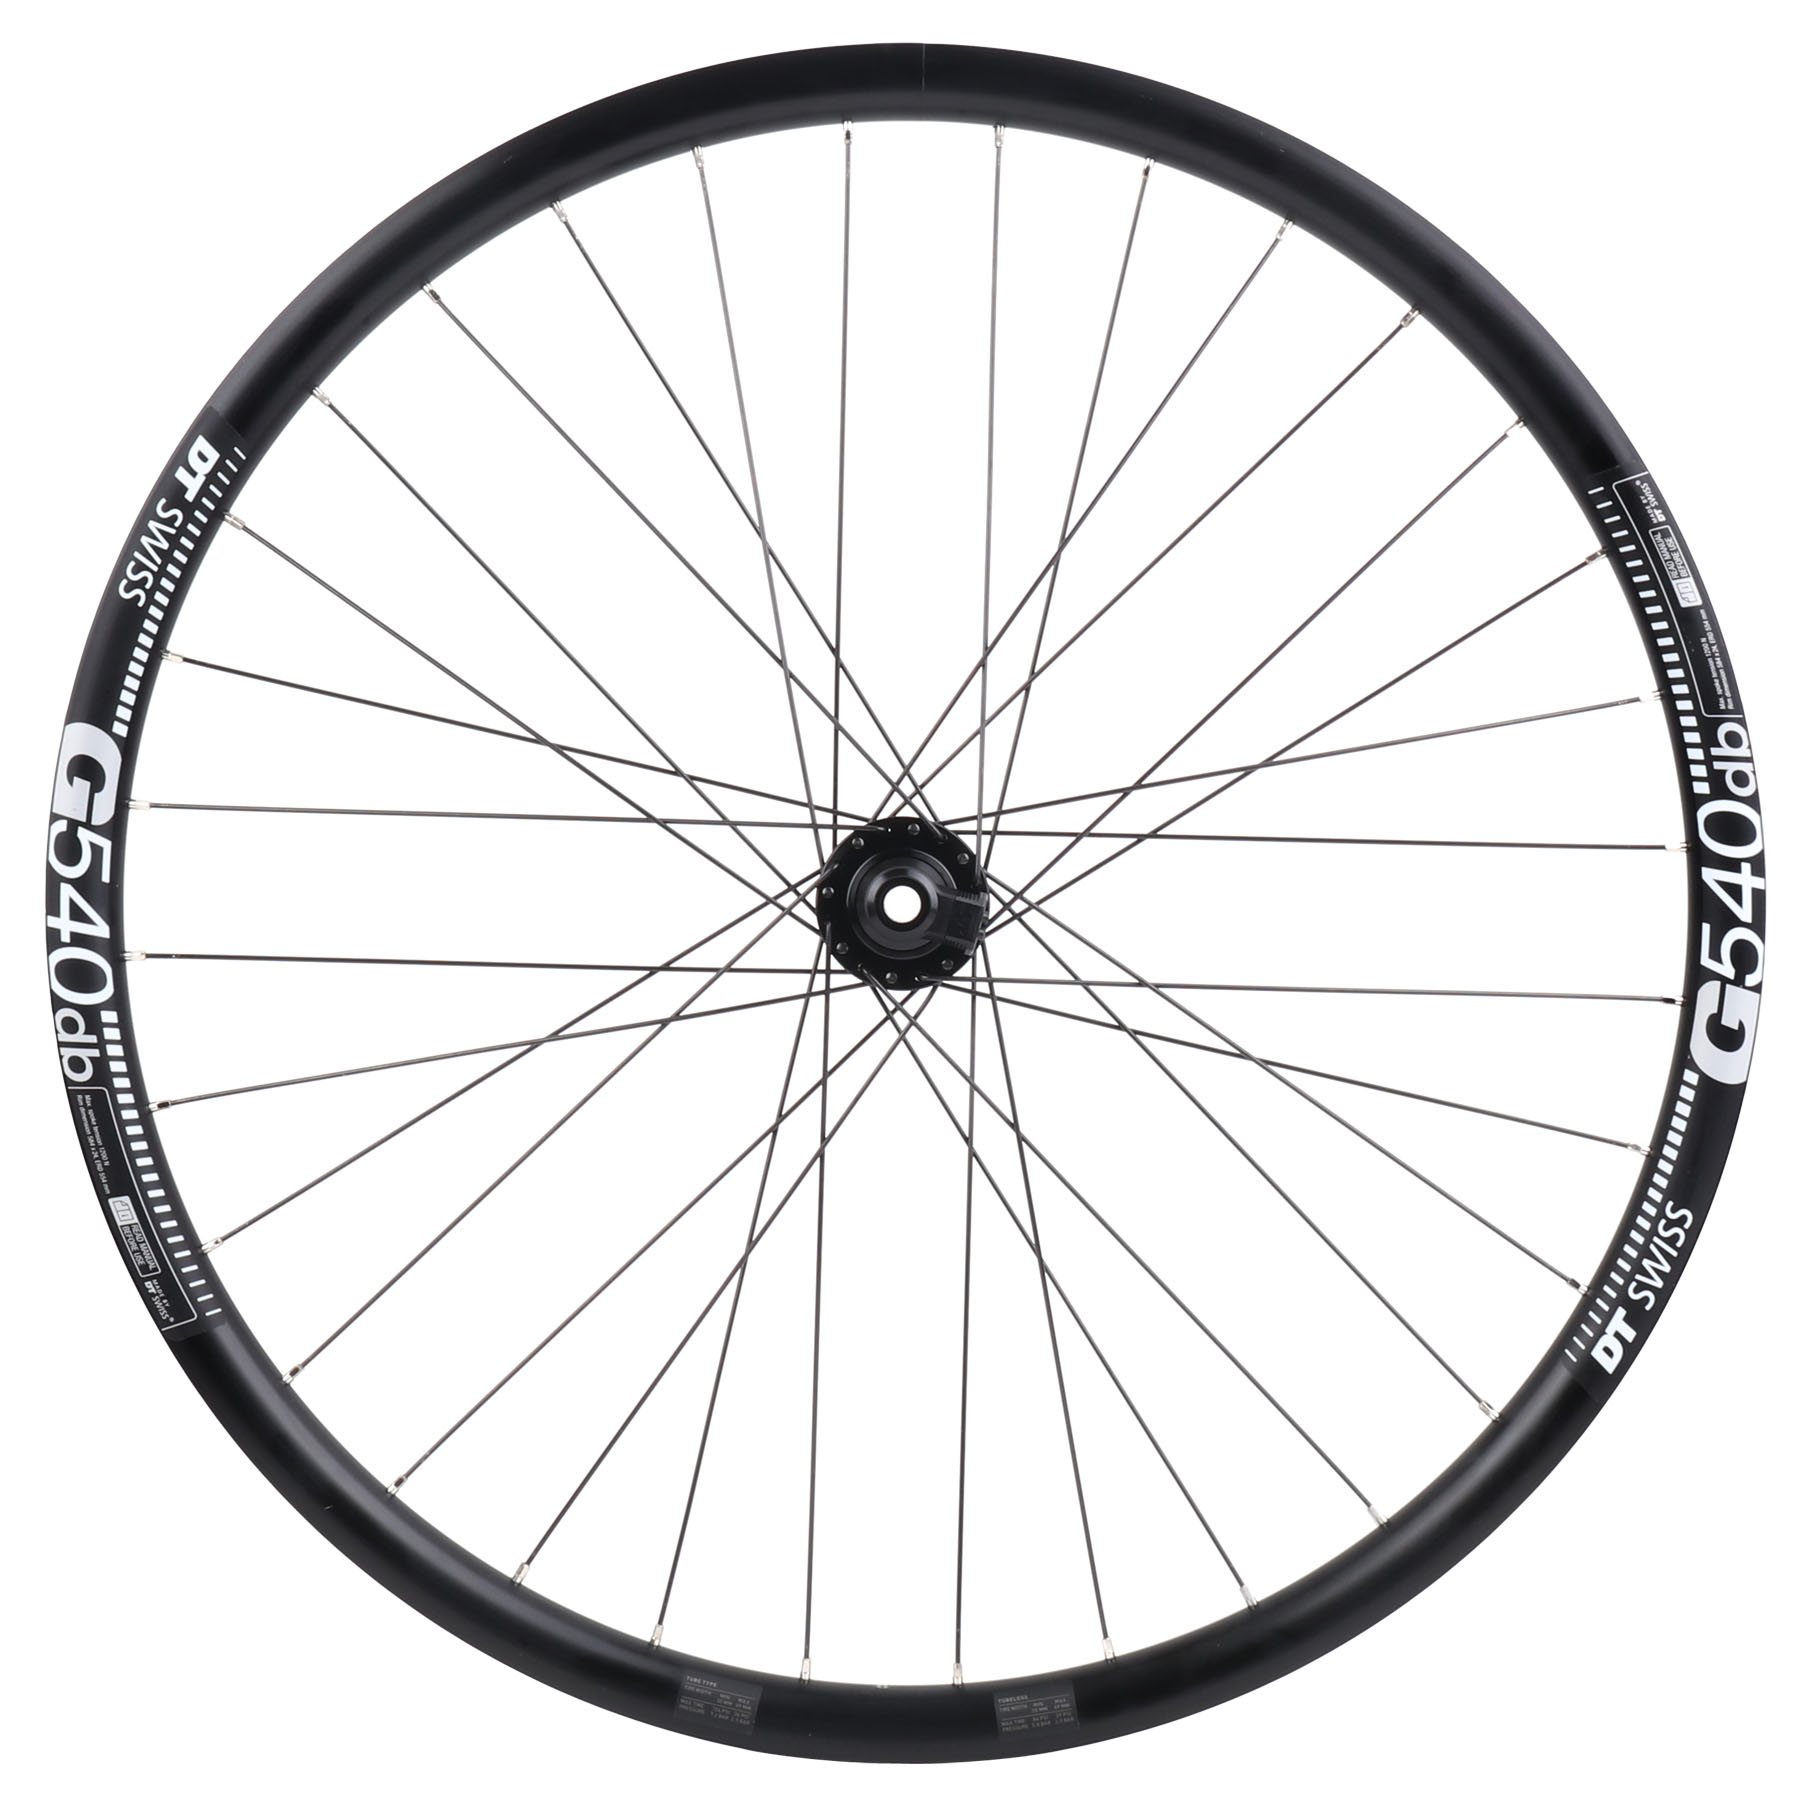 Picture of Shutter Precision | DT Swiss - PL-7 | G 540 Front Wheel with Hub Dynamo - 27.5 Inch - Centerlock - 12x100mm